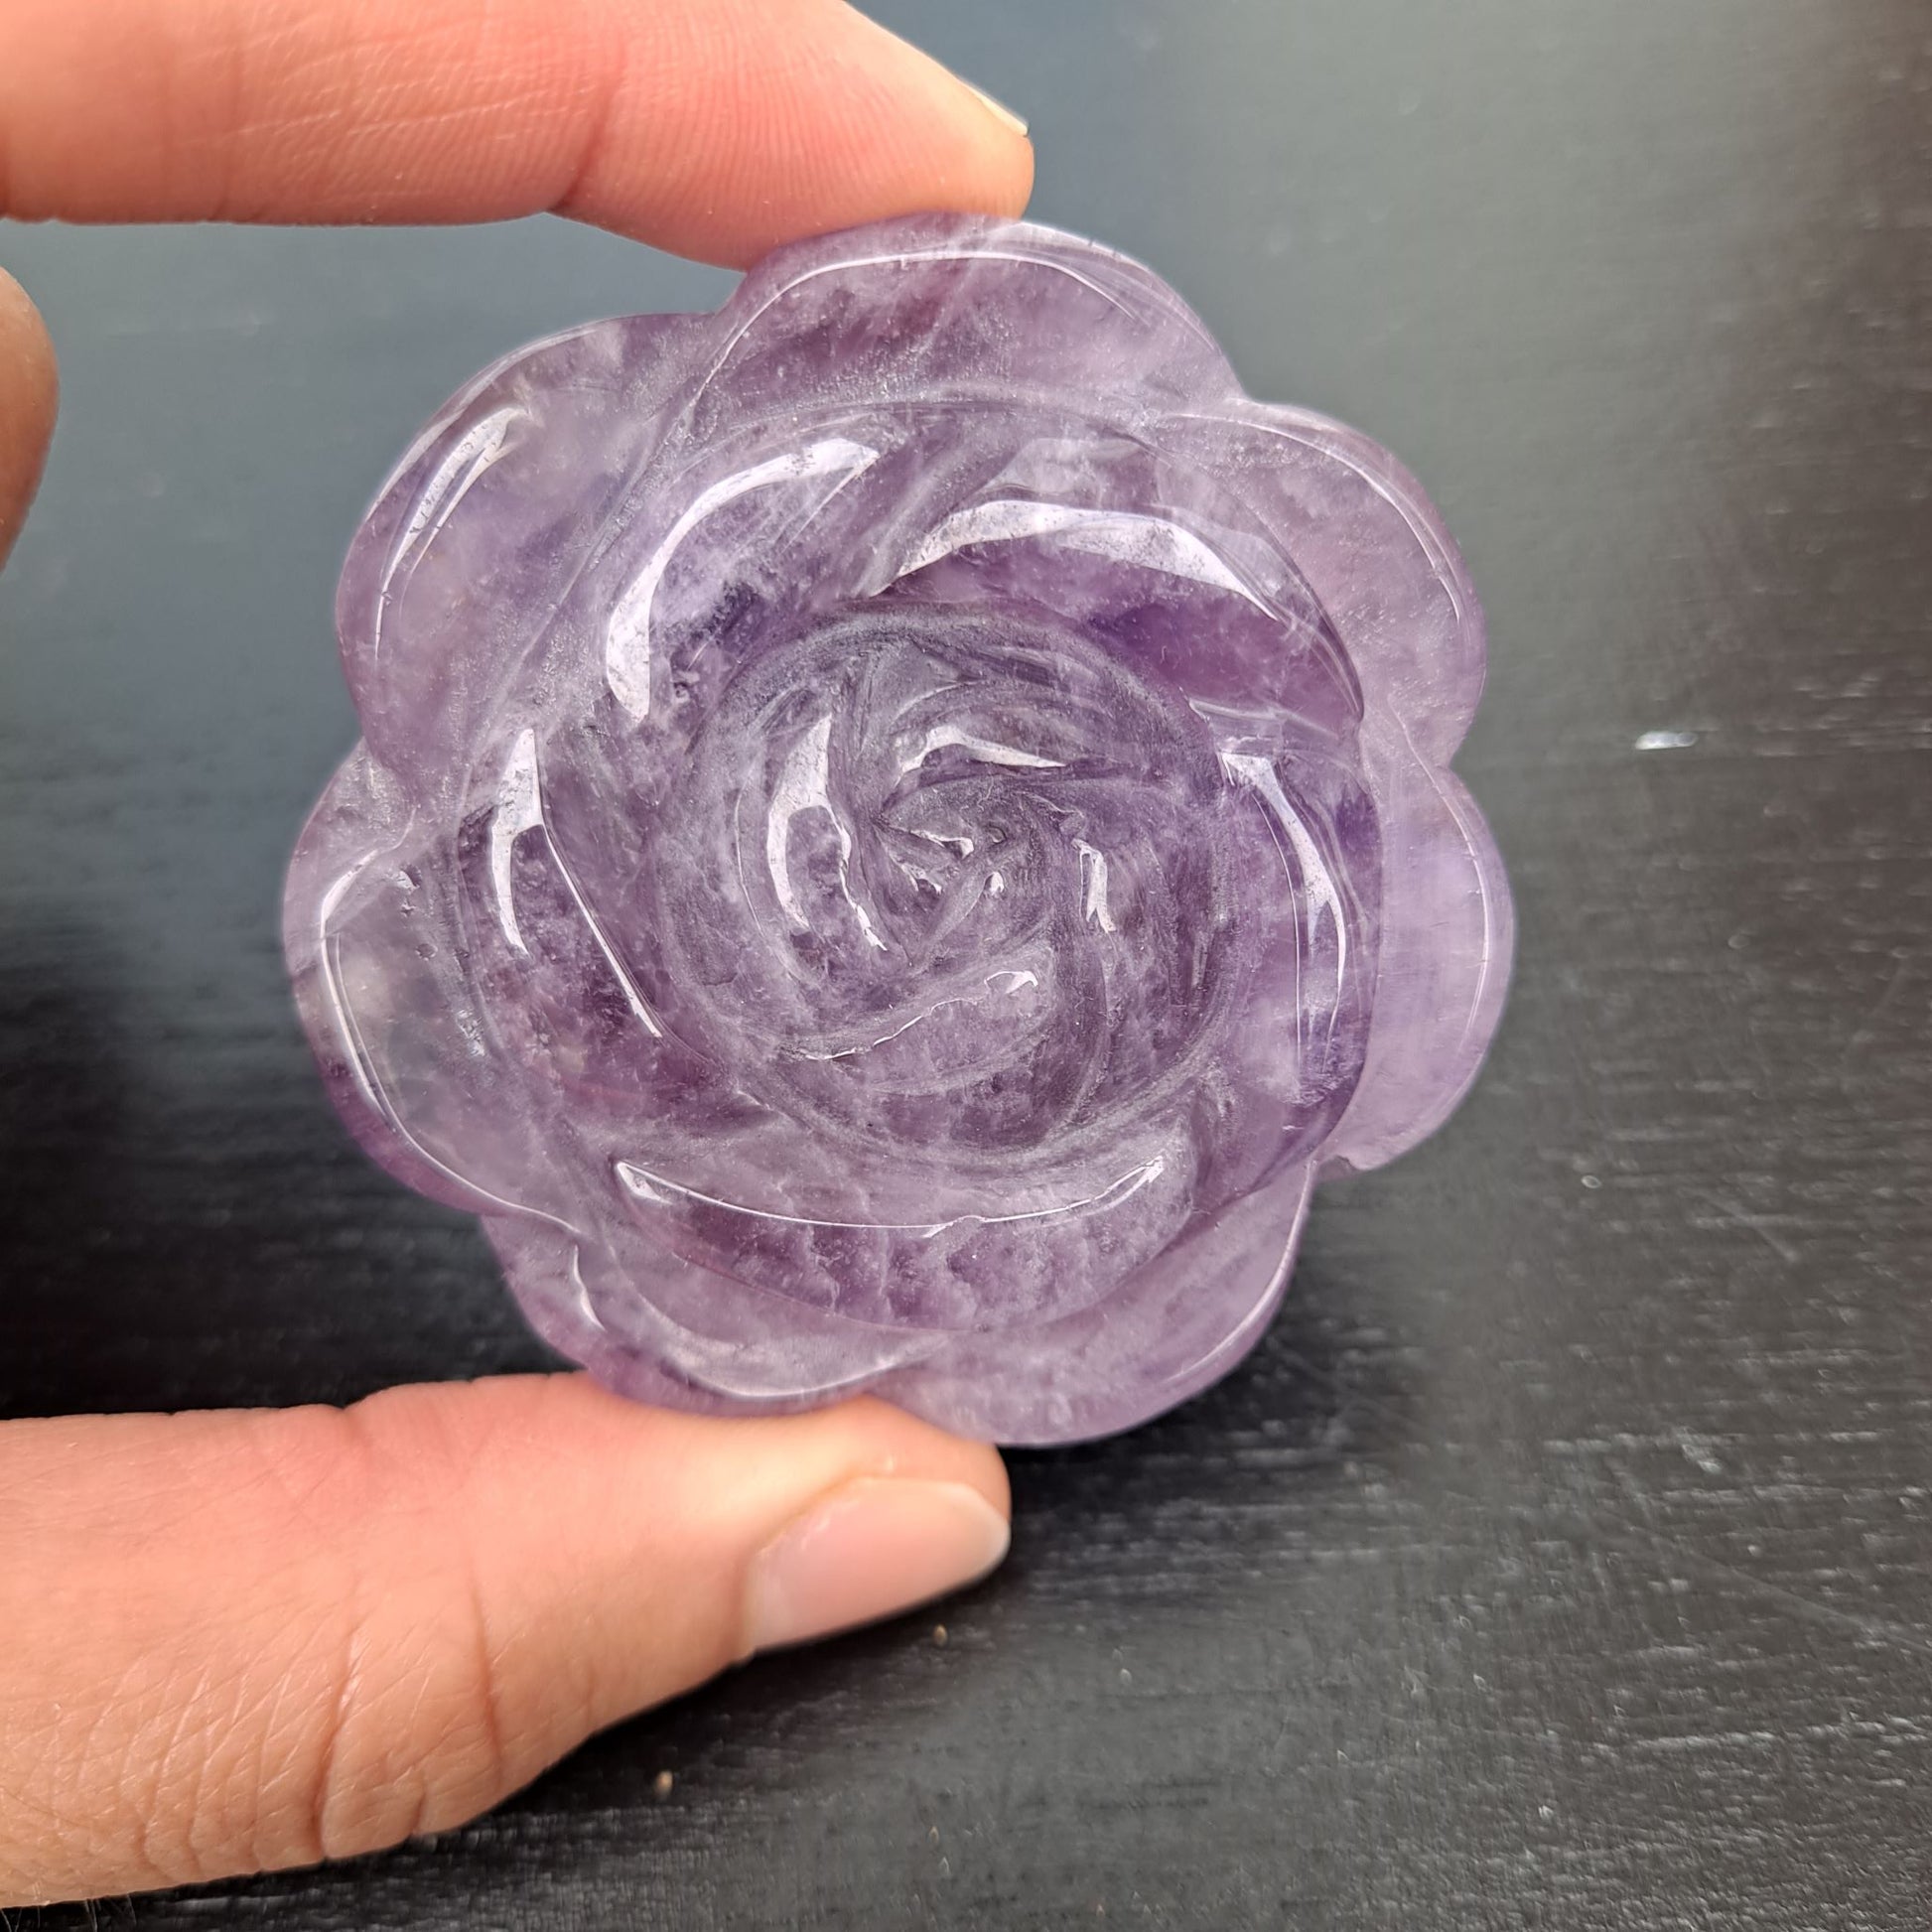 Dumi's Crystals | Amethyst Rose Carving (Shimmering Serenity) | Witness the captivating play of light on an Amethyst Rose Carving. Hand-carved from Amethyst, February's birthstone, this exquisite piece radiates serenity & promotes inner peace. Dumi's Crystals - Ethically sourced crystals for your spiritual journey.